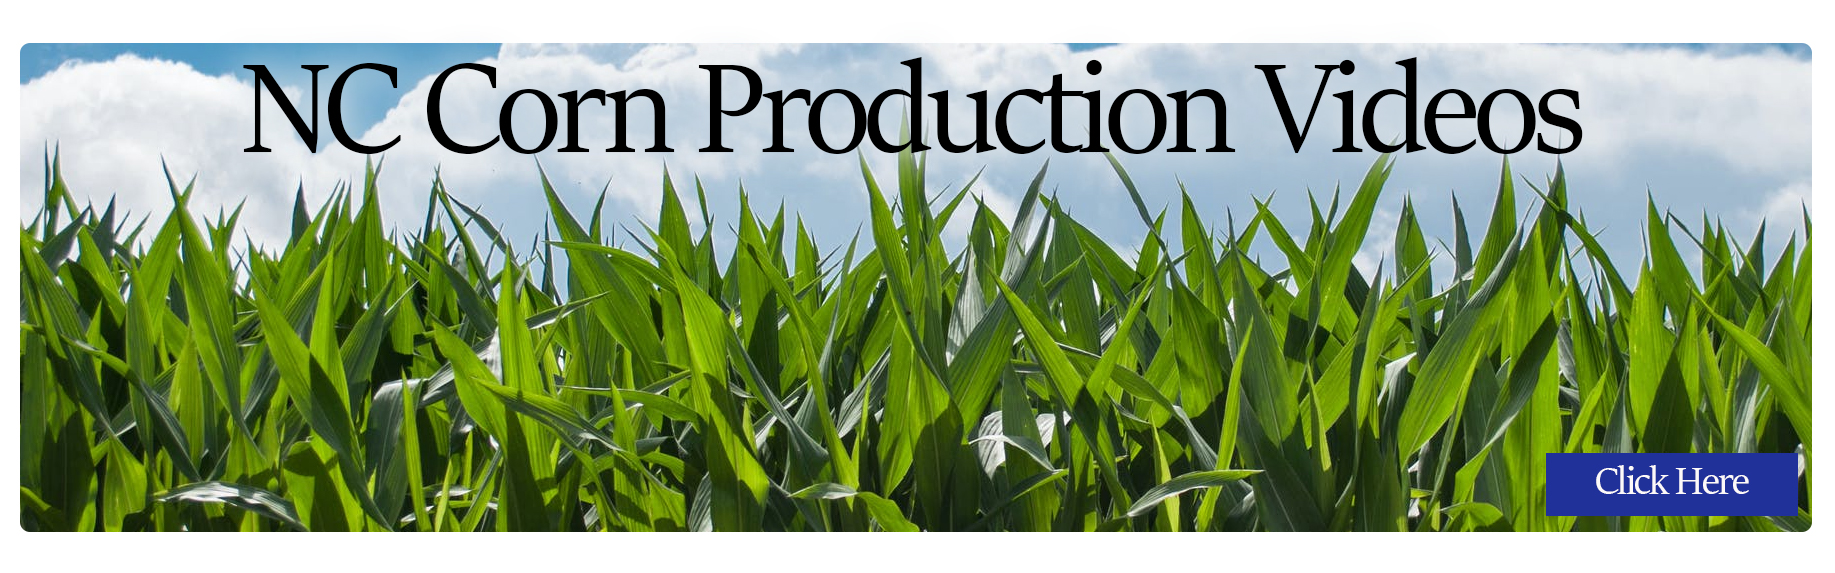 Click to view NC corn production videos